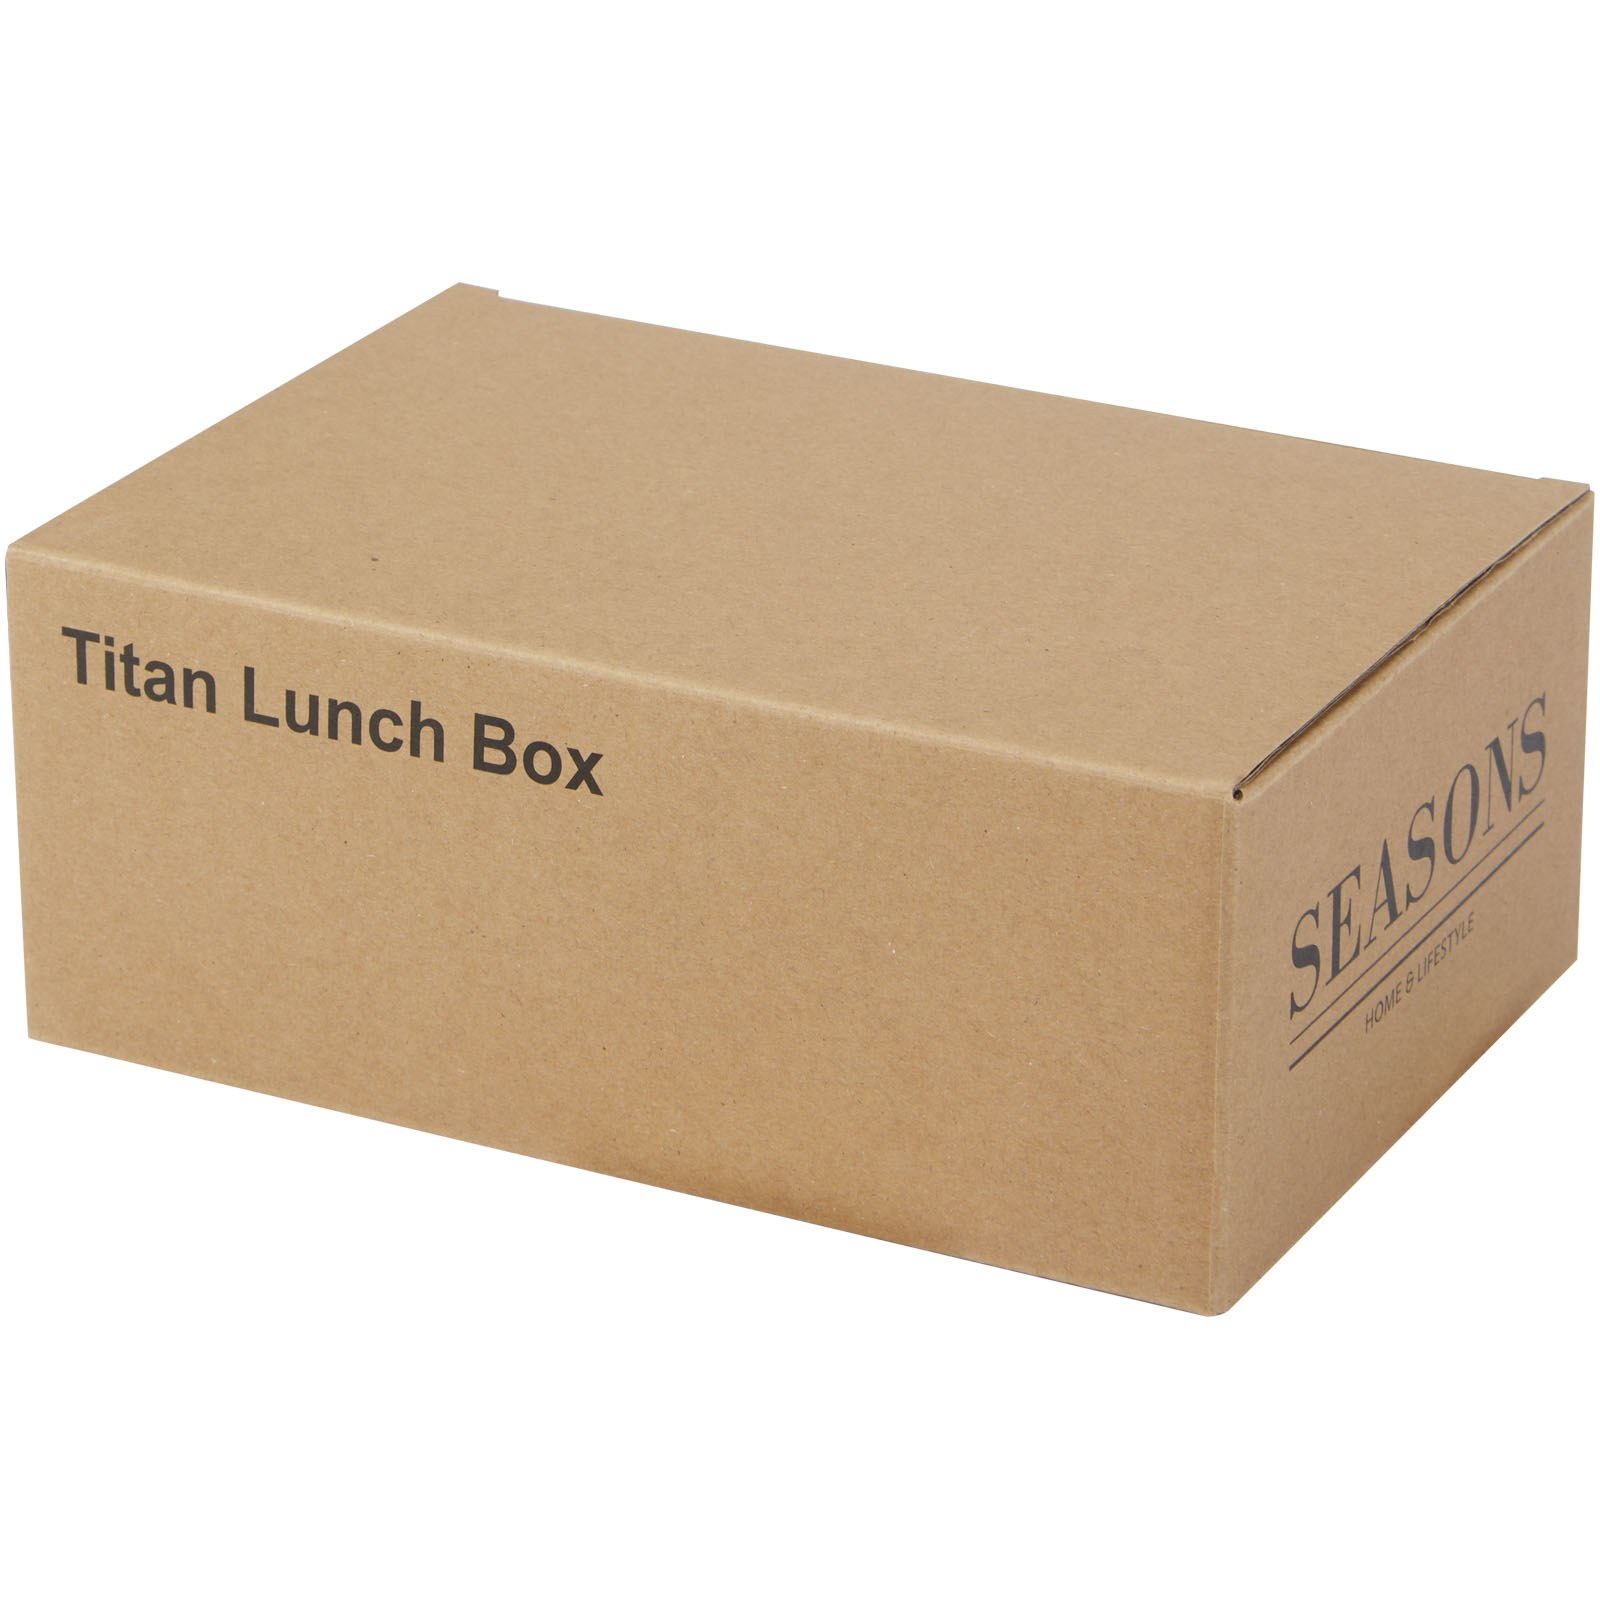 Advertising Lunch Boxes - Titan recycled stainless steel lunch box - 1